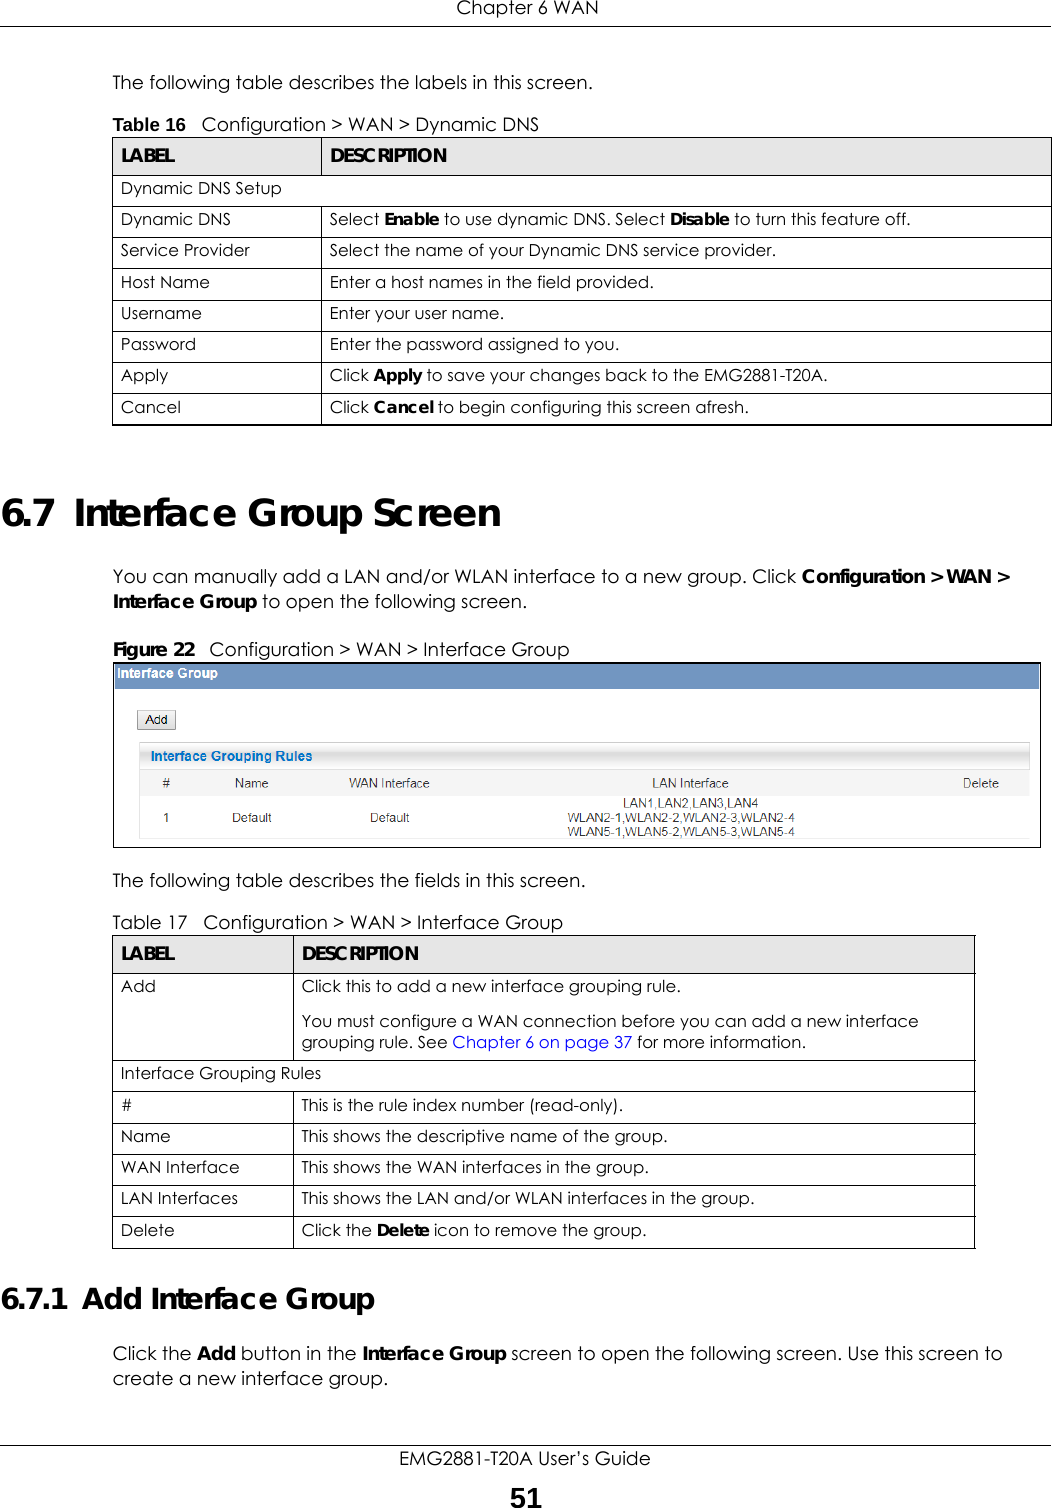  Chapter 6 WANEMG2881-T20A User’s Guide51The following table describes the labels in this screen.6.7  Interface Group ScreenYou can manually add a LAN and/or WLAN interface to a new group. Click Configuration &gt; WAN &gt; Interface Group to open the following screen. Figure 22   Configuration &gt; WAN &gt; Interface Group The following table describes the fields in this screen. 6.7.1  Add Interface GroupClick the Add button in the Interface Group screen to open the following screen. Use this screen to create a new interface group. Table 16   Configuration &gt; WAN &gt; Dynamic DNSLABEL DESCRIPTIONDynamic DNS SetupDynamic DNS Select Enable to use dynamic DNS. Select Disable to turn this feature off.Service Provider Select the name of your Dynamic DNS service provider.Host Name Enter a host names in the field provided.Username Enter your user name.Password Enter the password assigned to you.Apply Click Apply to save your changes back to the EMG2881-T20A.Cancel Click Cancel to begin configuring this screen afresh.Table 17   Configuration &gt; WAN &gt; Interface GroupLABEL DESCRIPTIONAdd Click this to add a new interface grouping rule. You must configure a WAN connection before you can add a new interface grouping rule. See Chapter 6 on page 37 for more information. Interface Grouping Rules#This is the rule index number (read-only).Name This shows the descriptive name of the group.WAN Interface This shows the WAN interfaces in the group.LAN Interfaces This shows the LAN and/or WLAN interfaces in the group.Delete Click the Delete icon to remove the group.